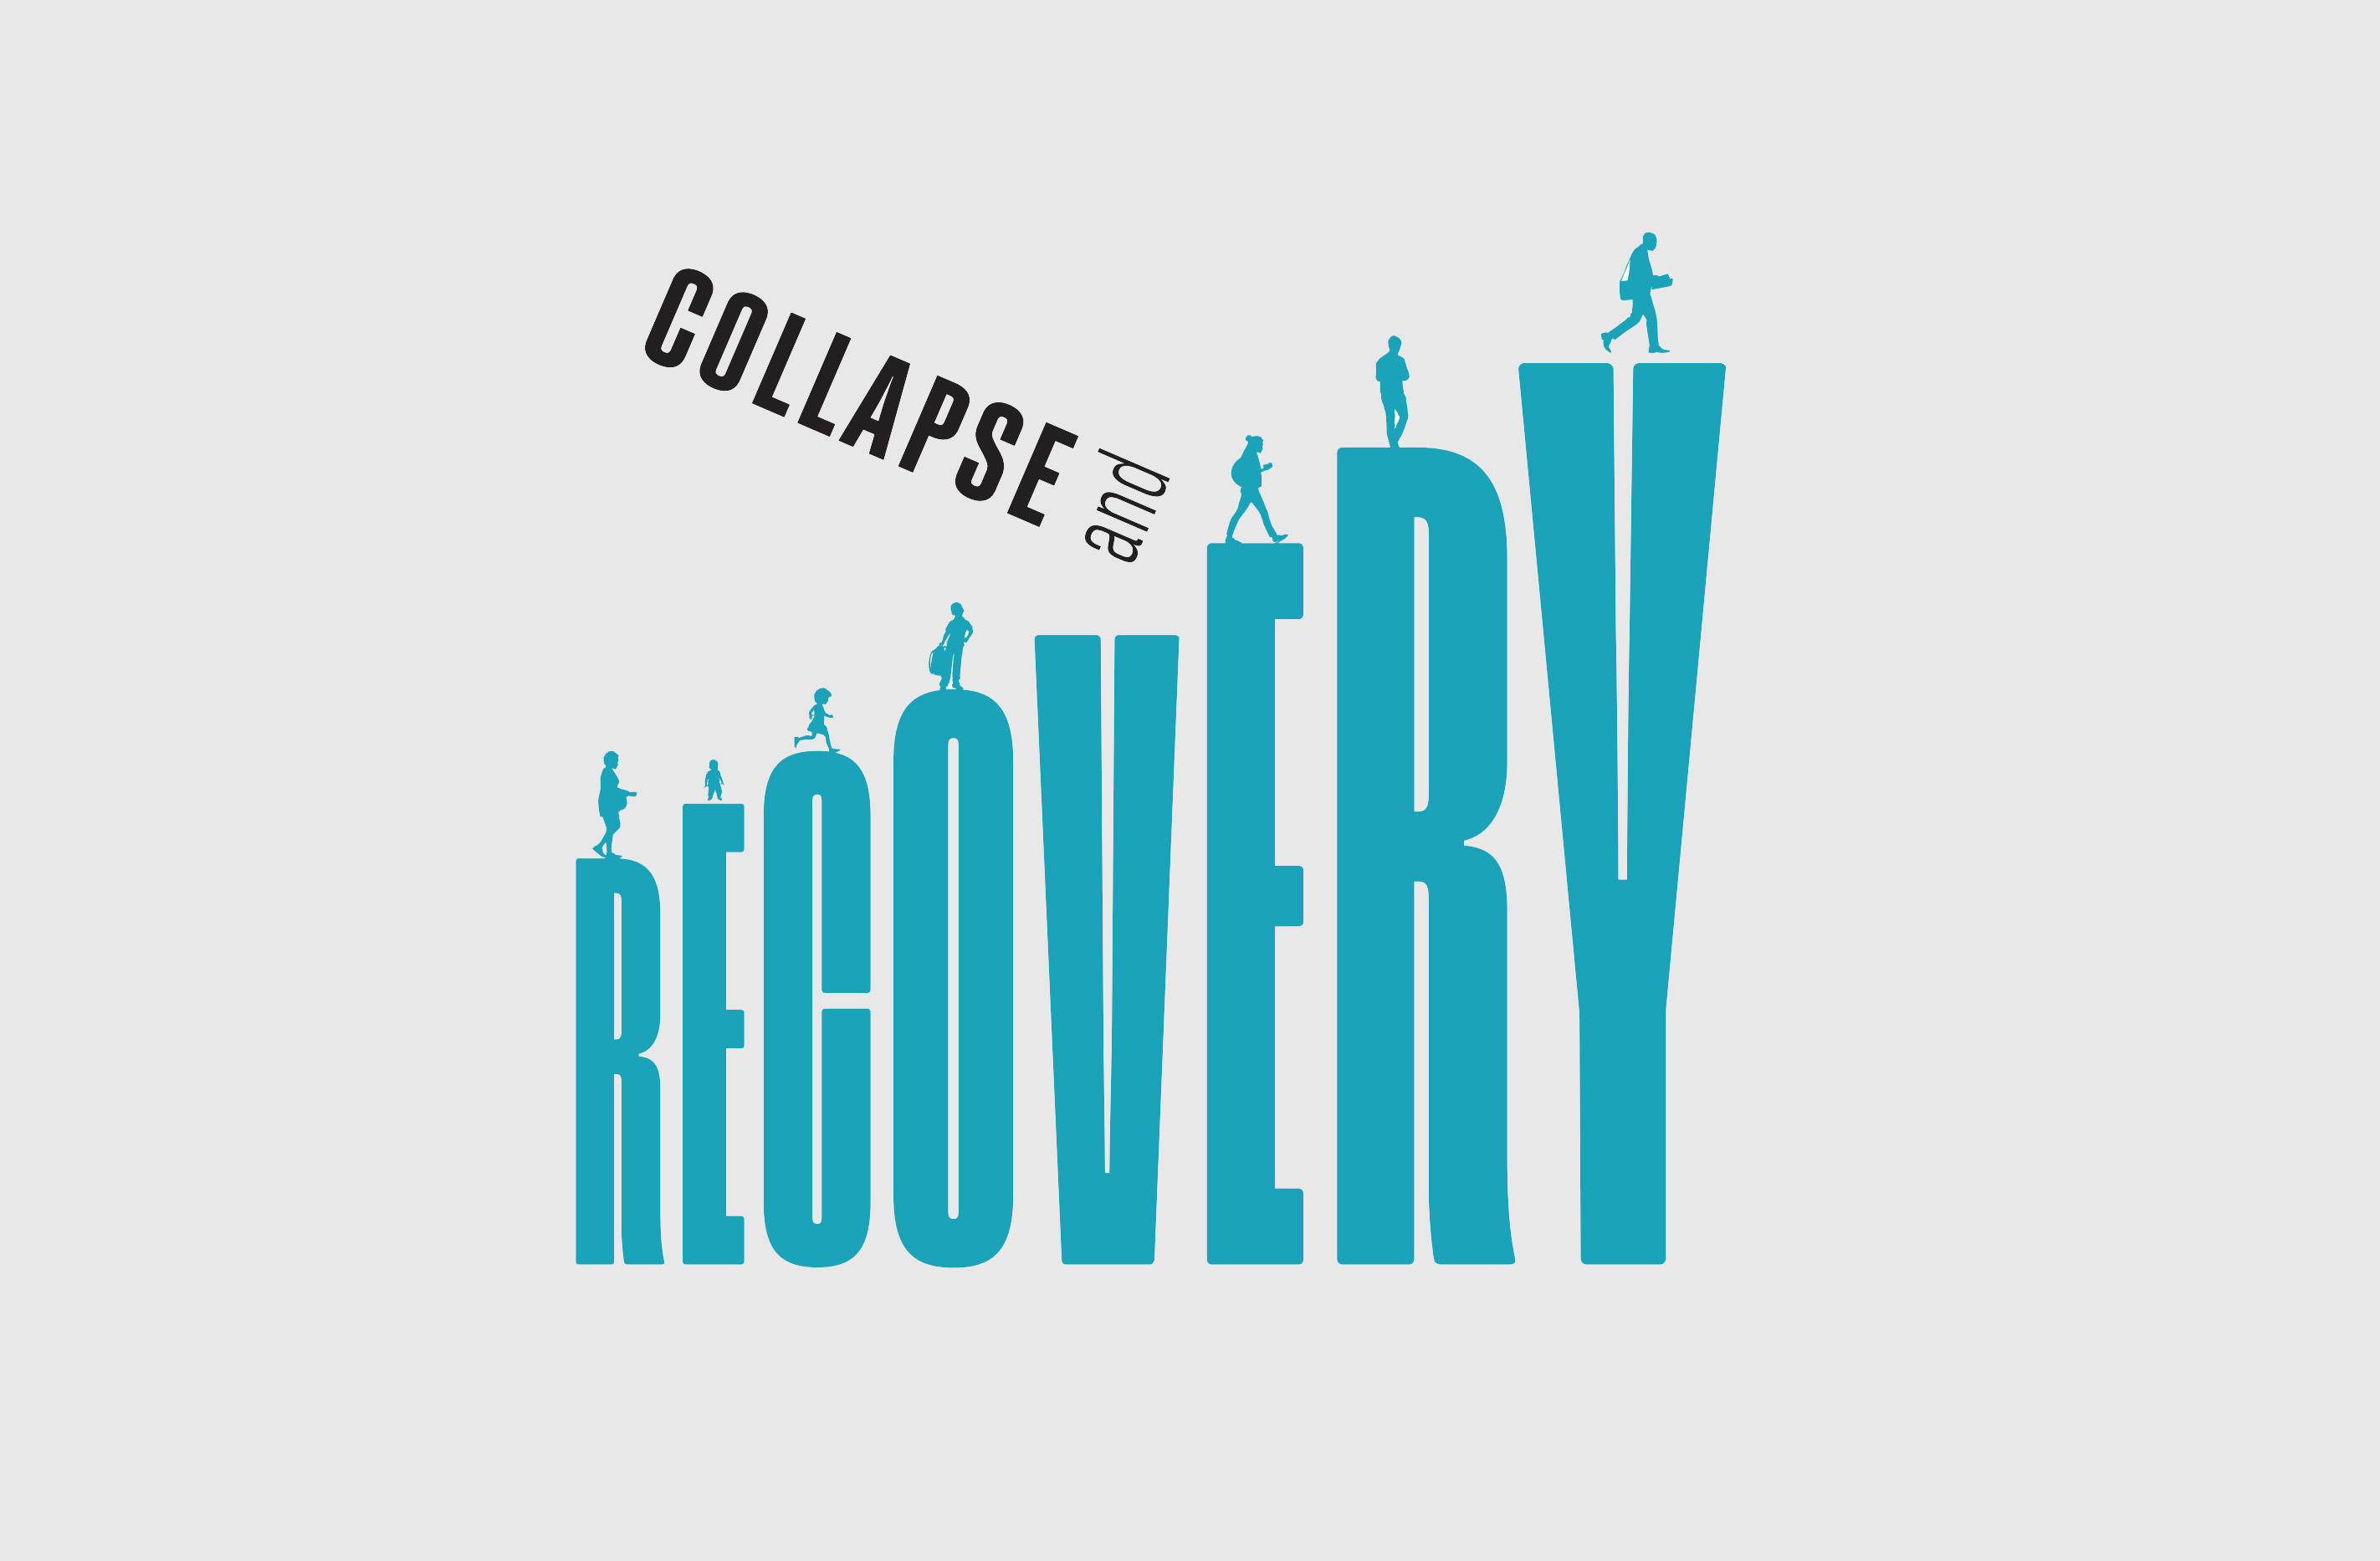 Collapse and recovery. How the COVID-19 Pandemic Eroded Human Capital and What to Do about It